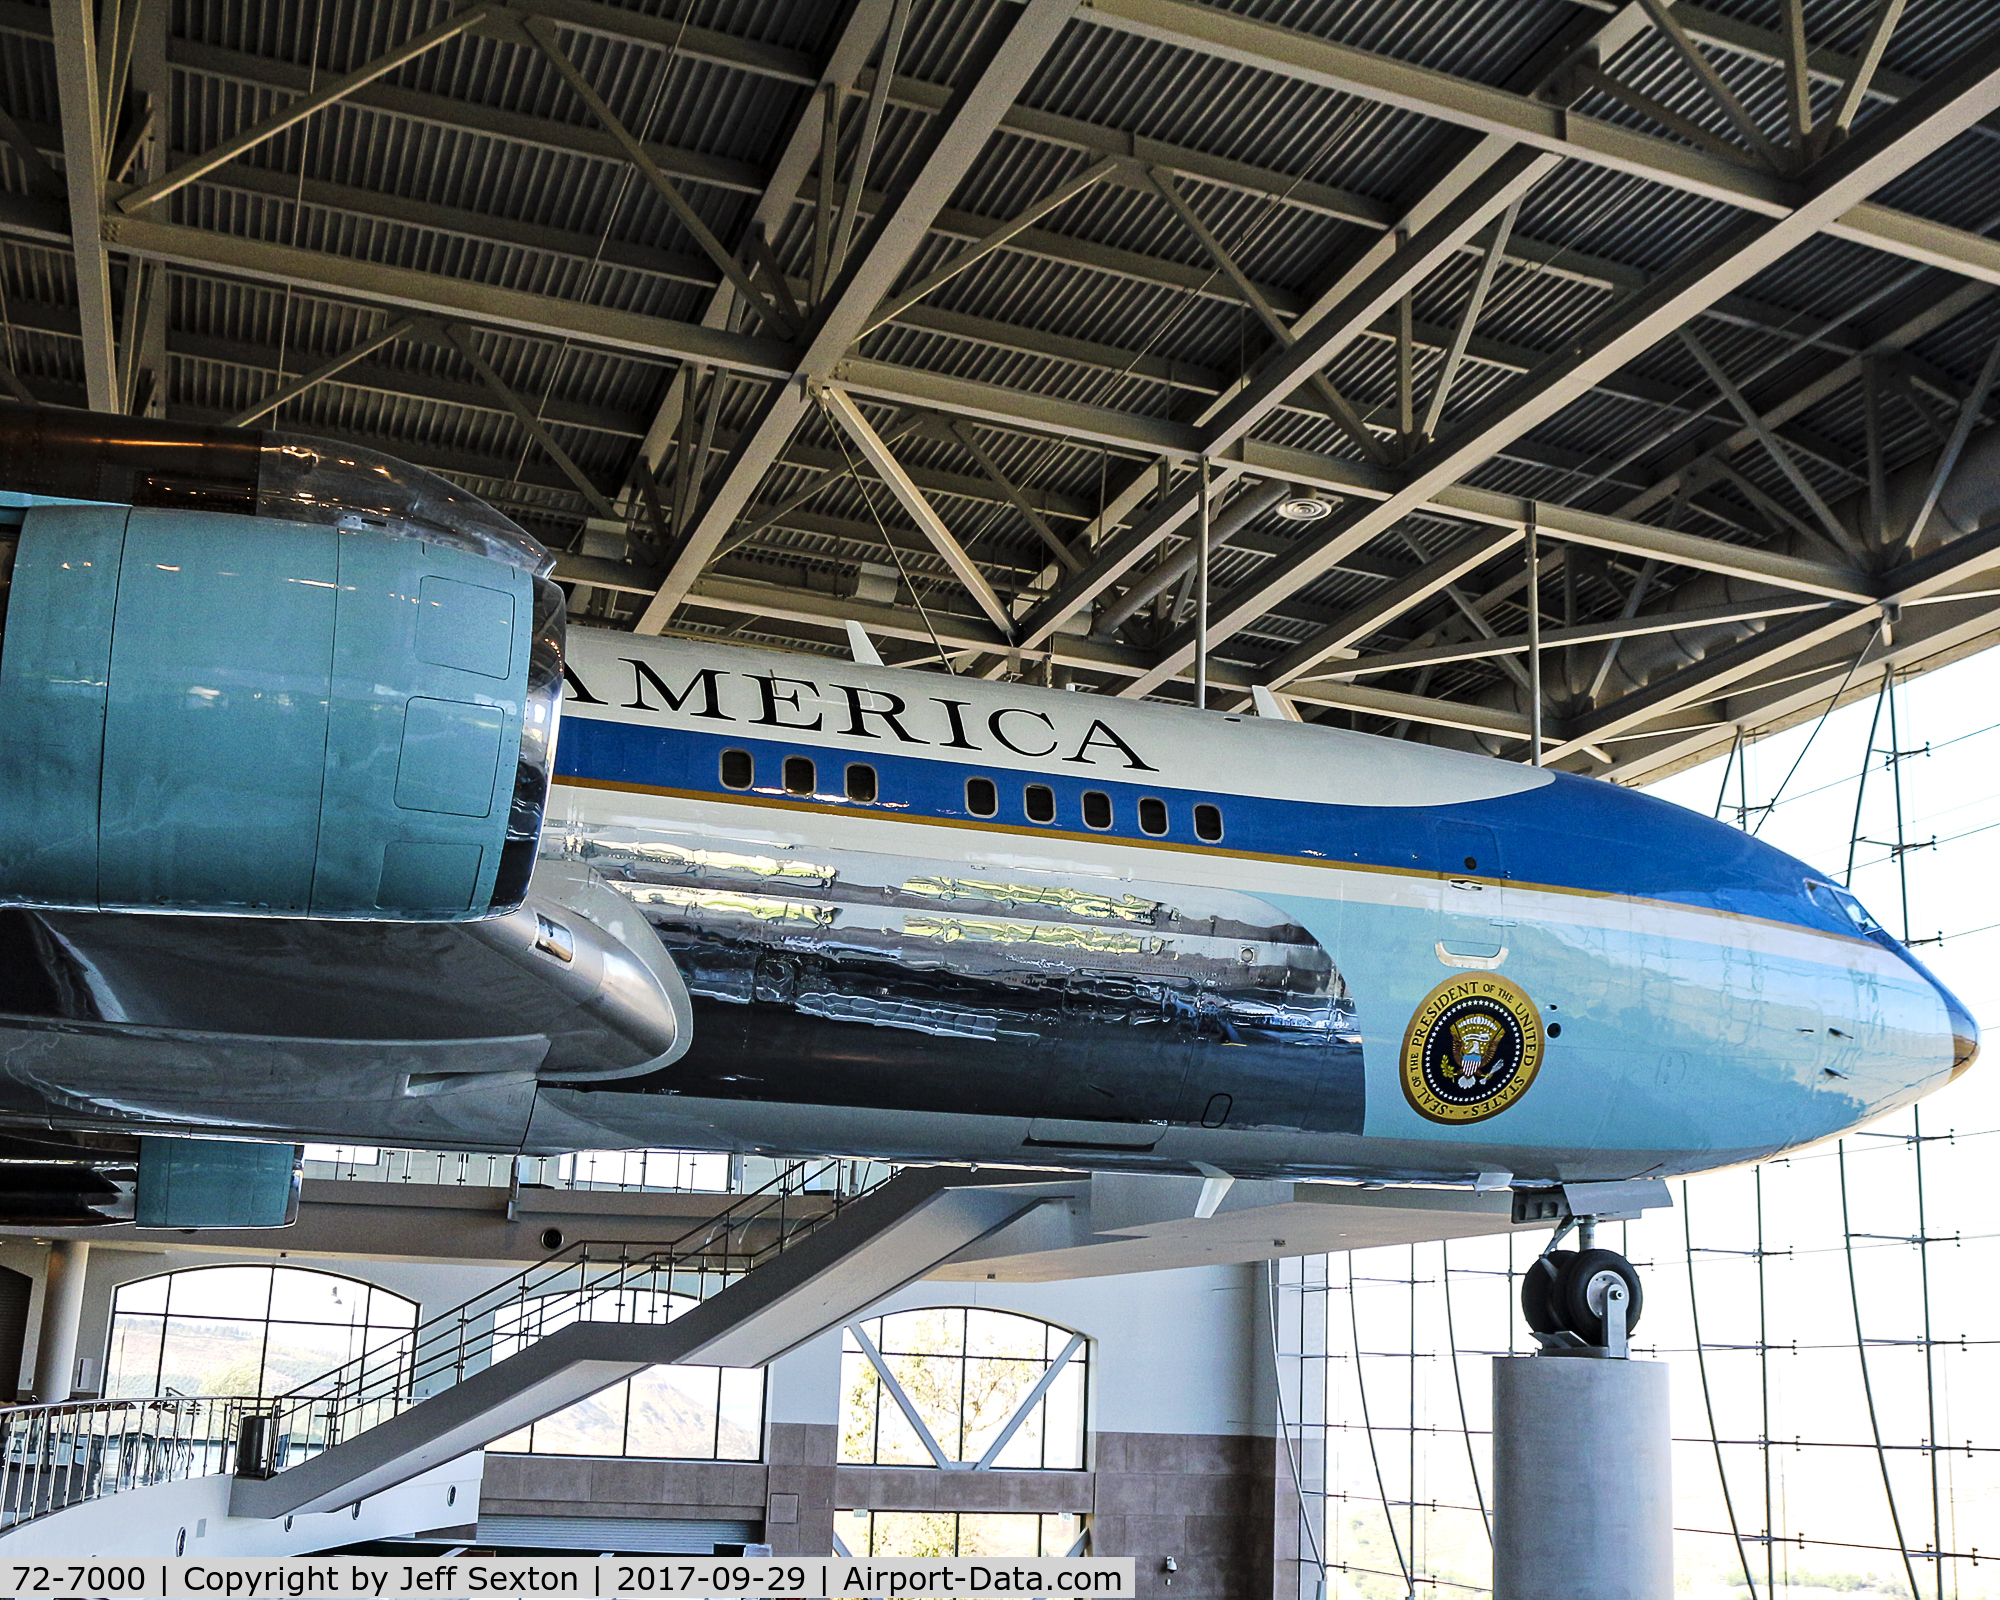 72-7000, 1972 Boeing VC-137C C/N 20630, President Ronald Reagan's Air Force One